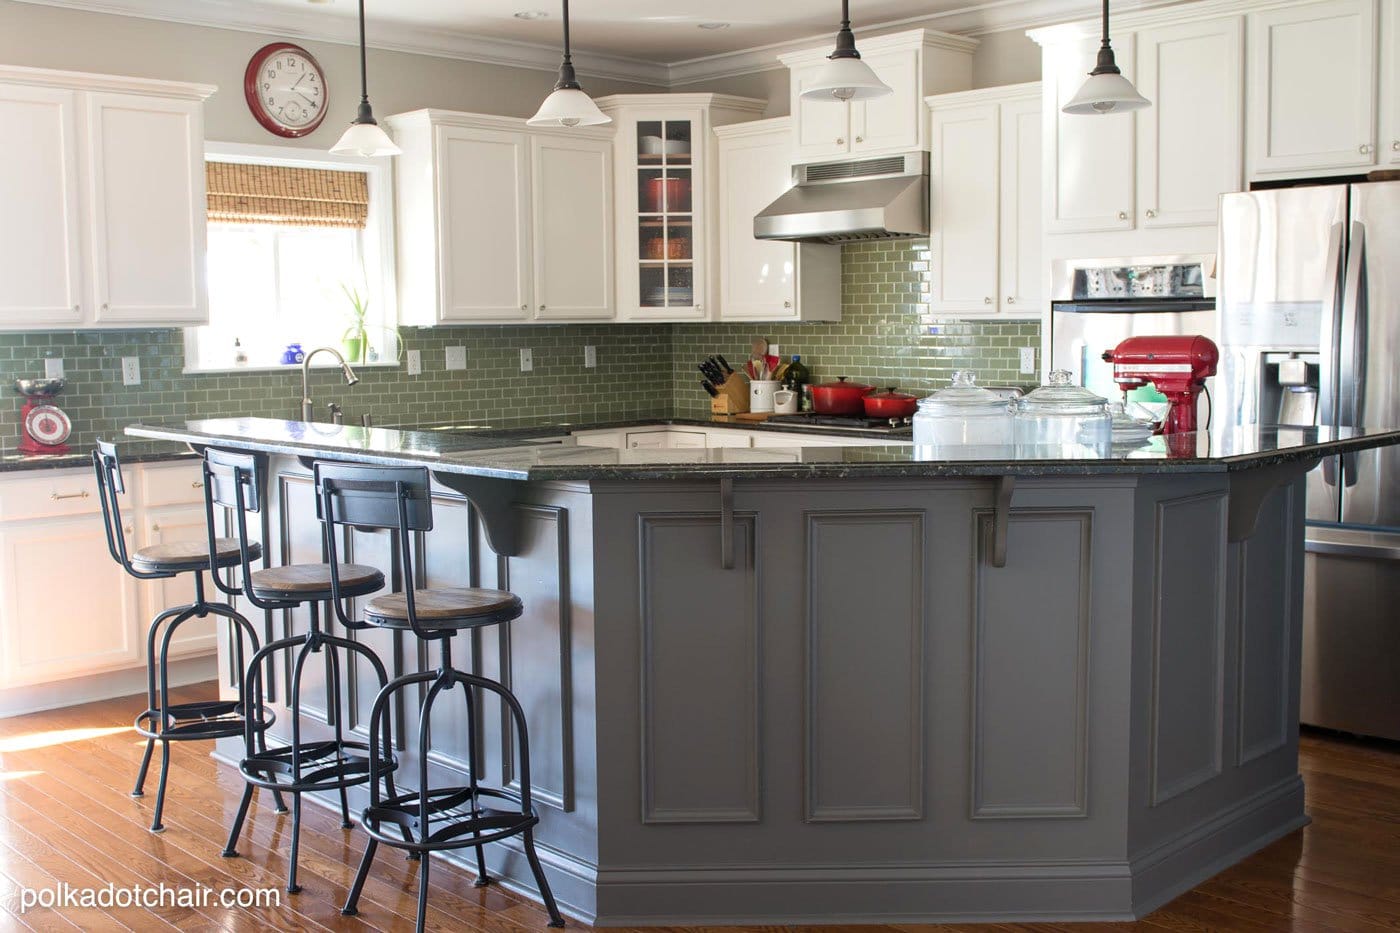 Before and After Photos of a Kitchen that had it's Cabinets Painted White- lots of great ideas for decorating a farmhouse style kitchen!